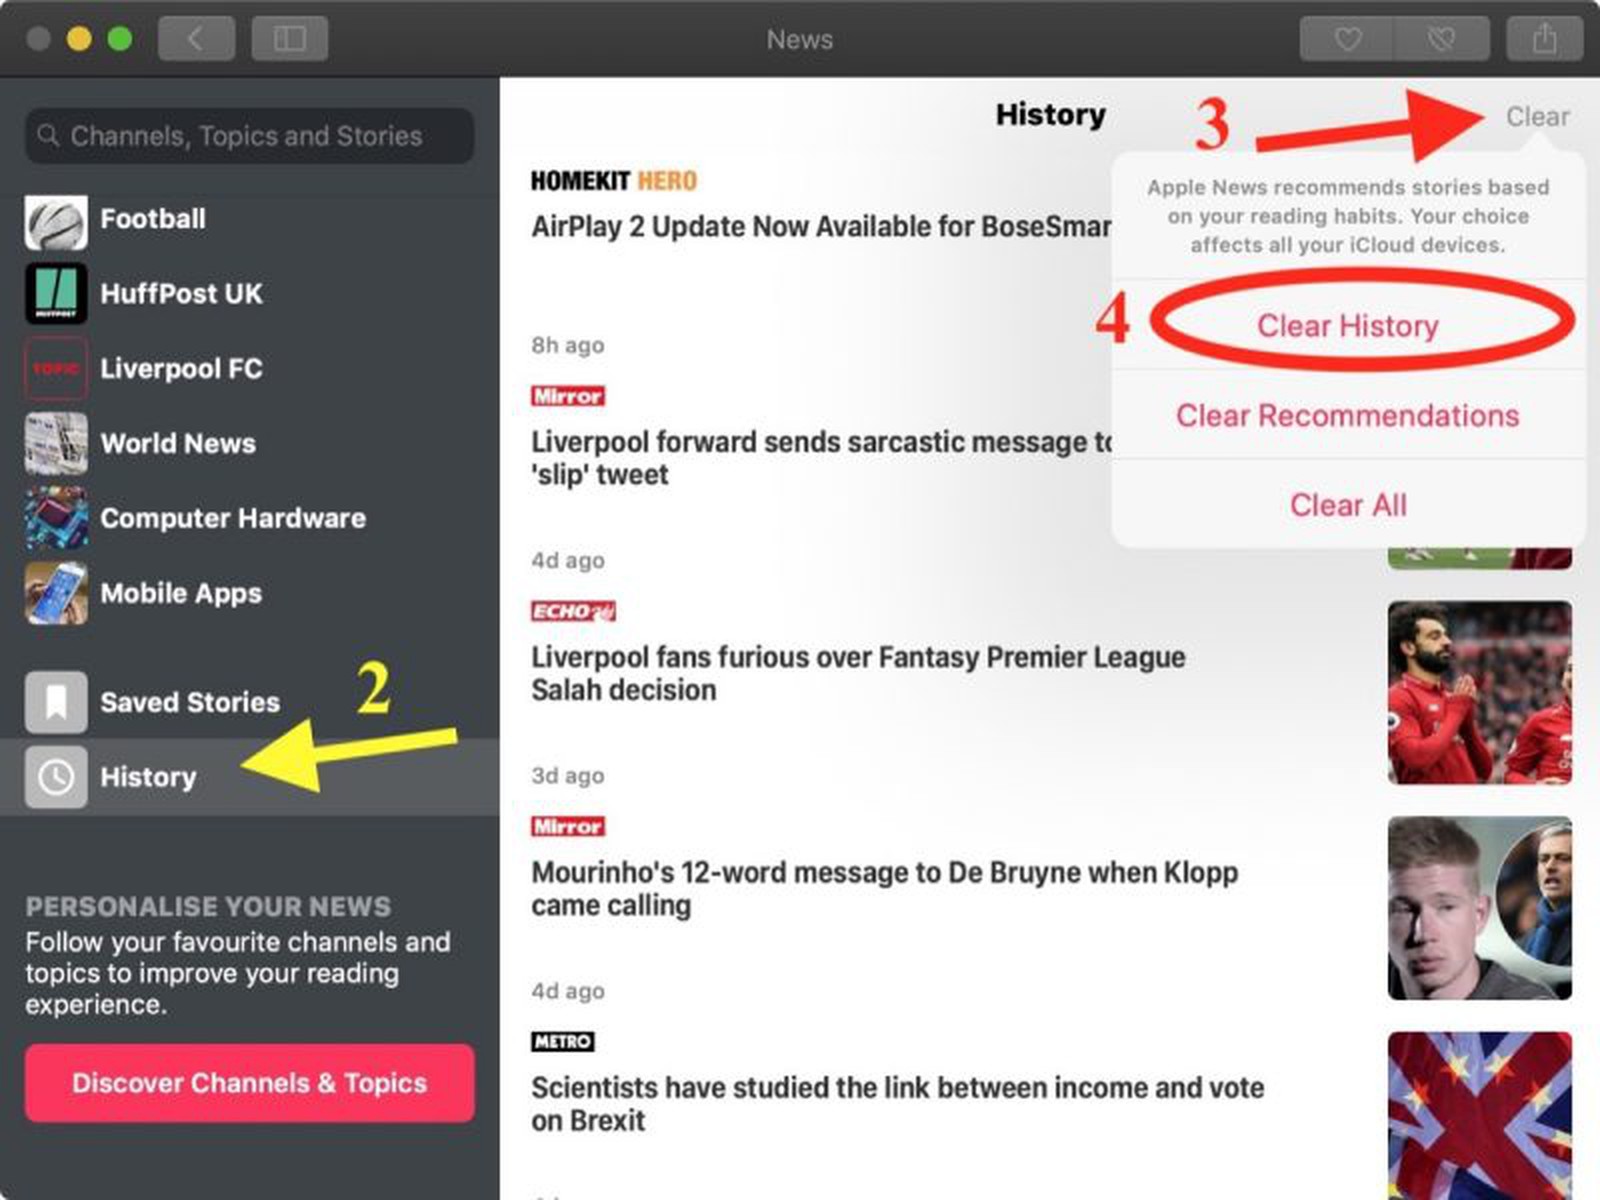 How to Clear Your Apple News Reading History - MacRumors